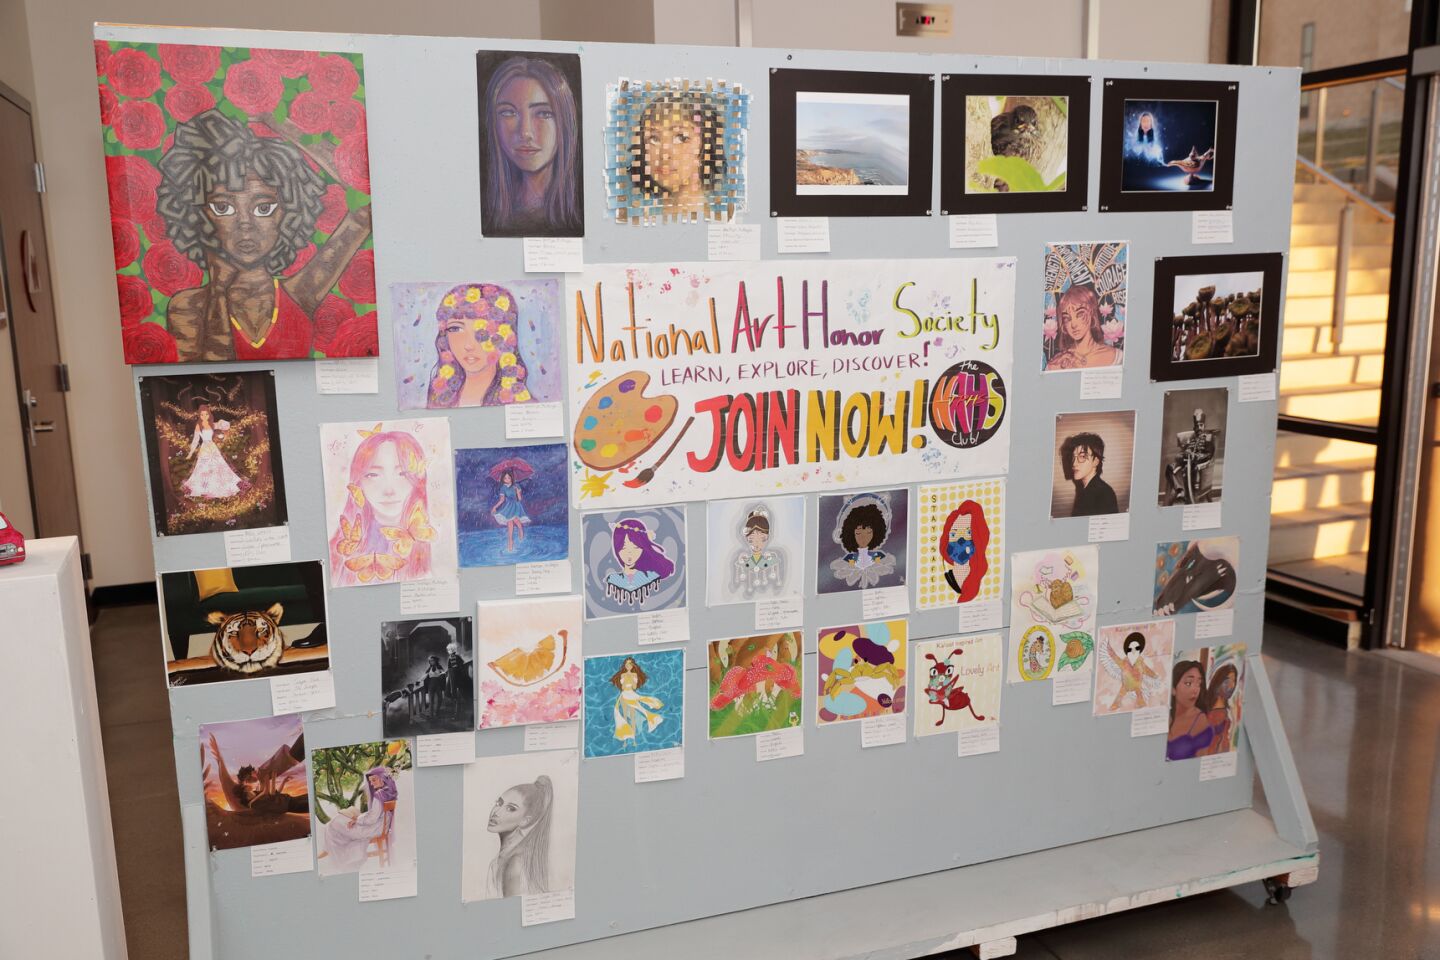 Projects created by National Art Honor Society Members